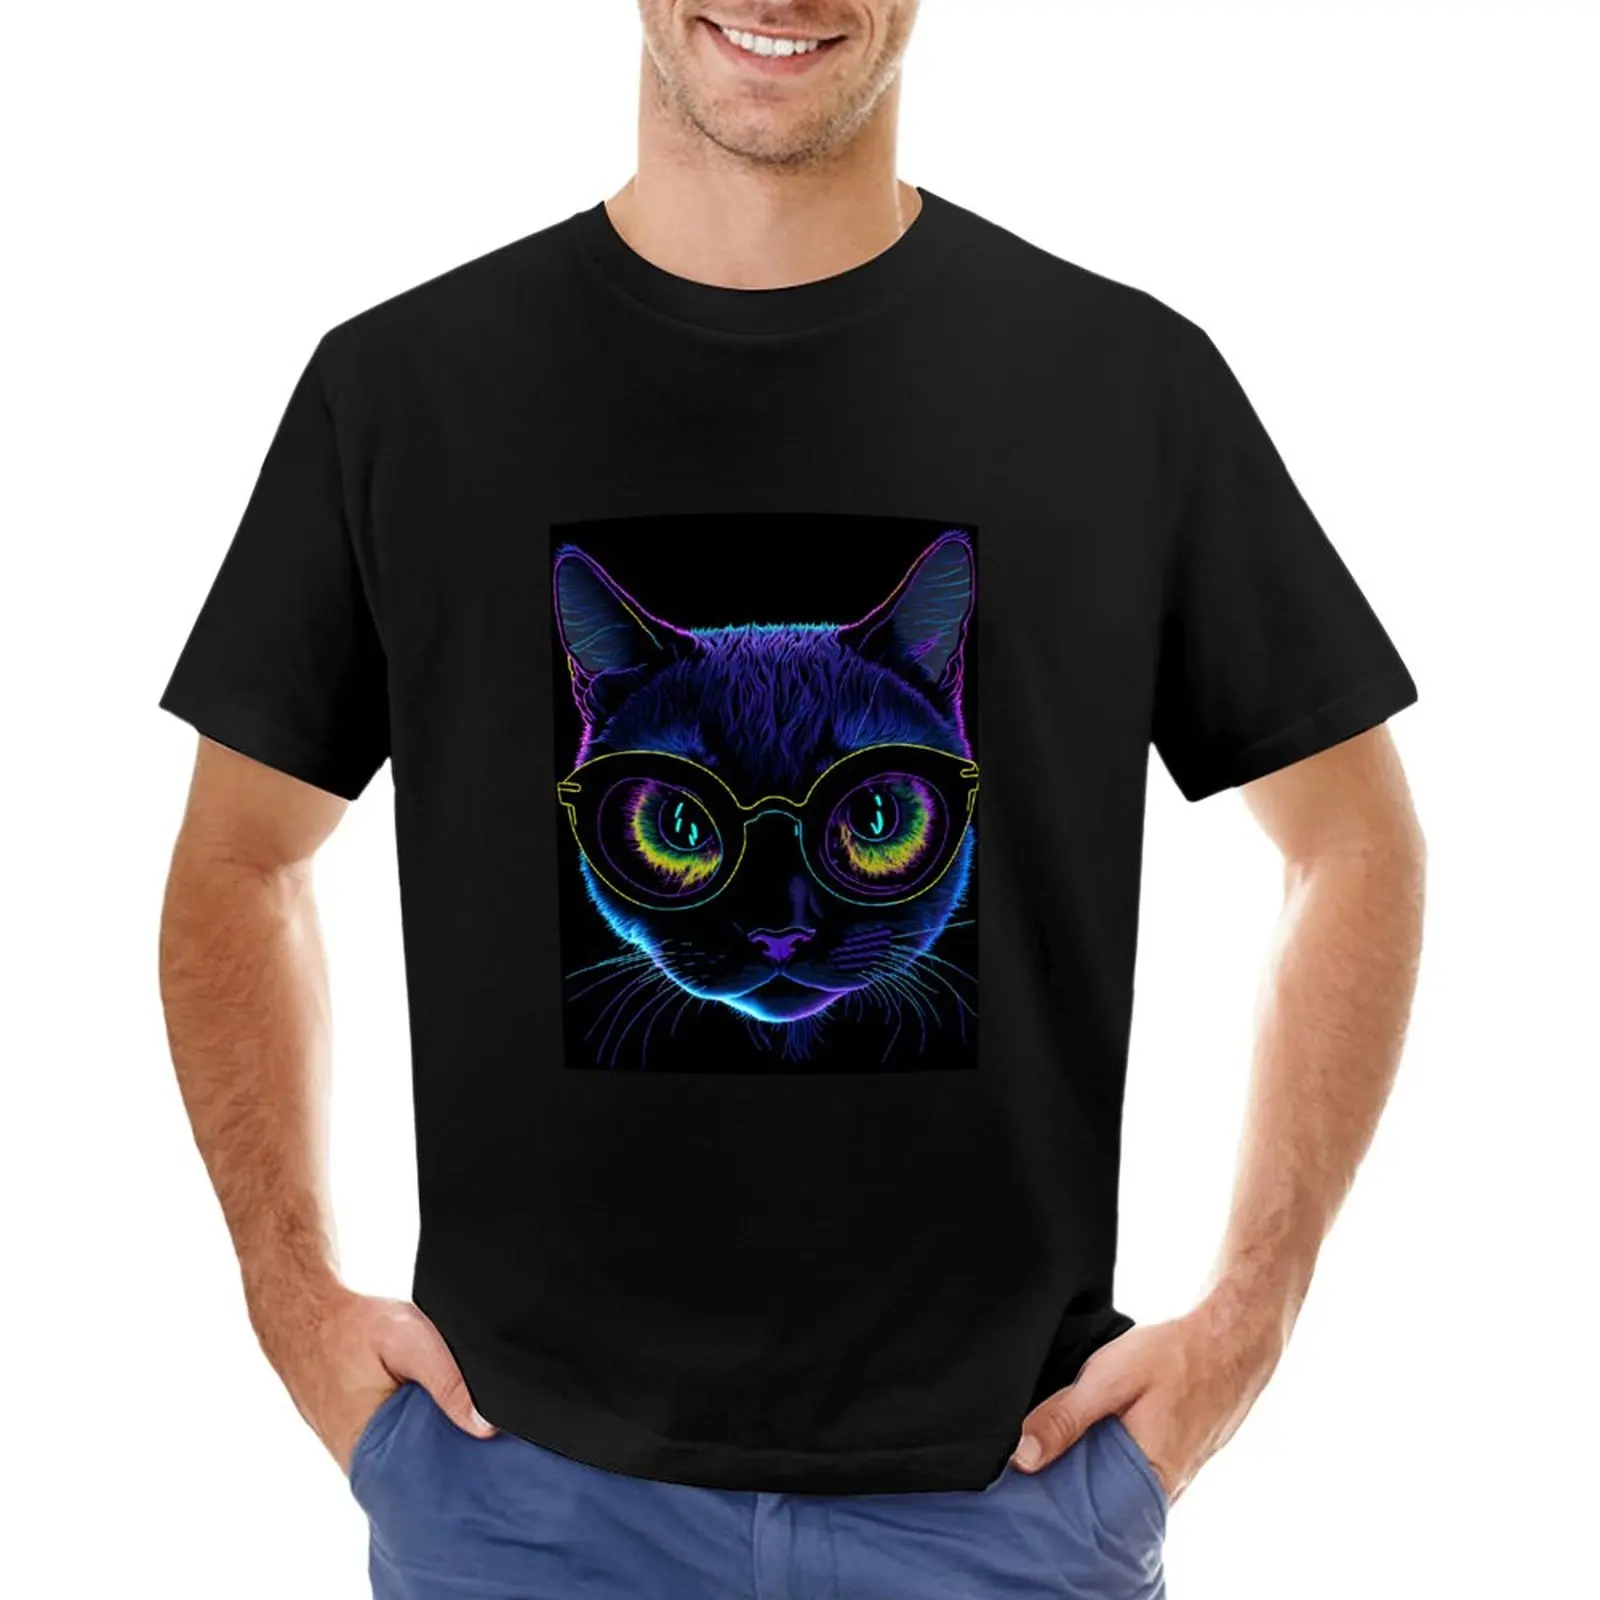 

Funny Kitten with glasses looking at me T-Shirt oversized t shirts T-shirt men